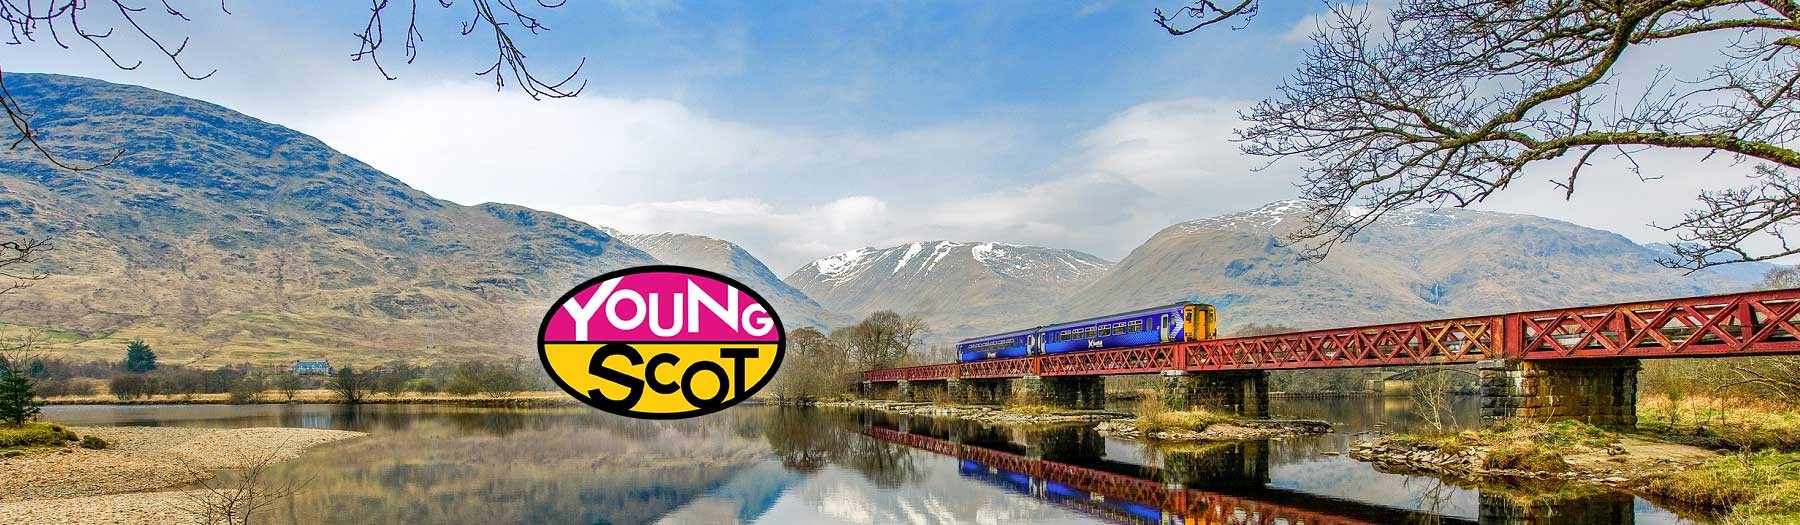 Young Scot Railcard 